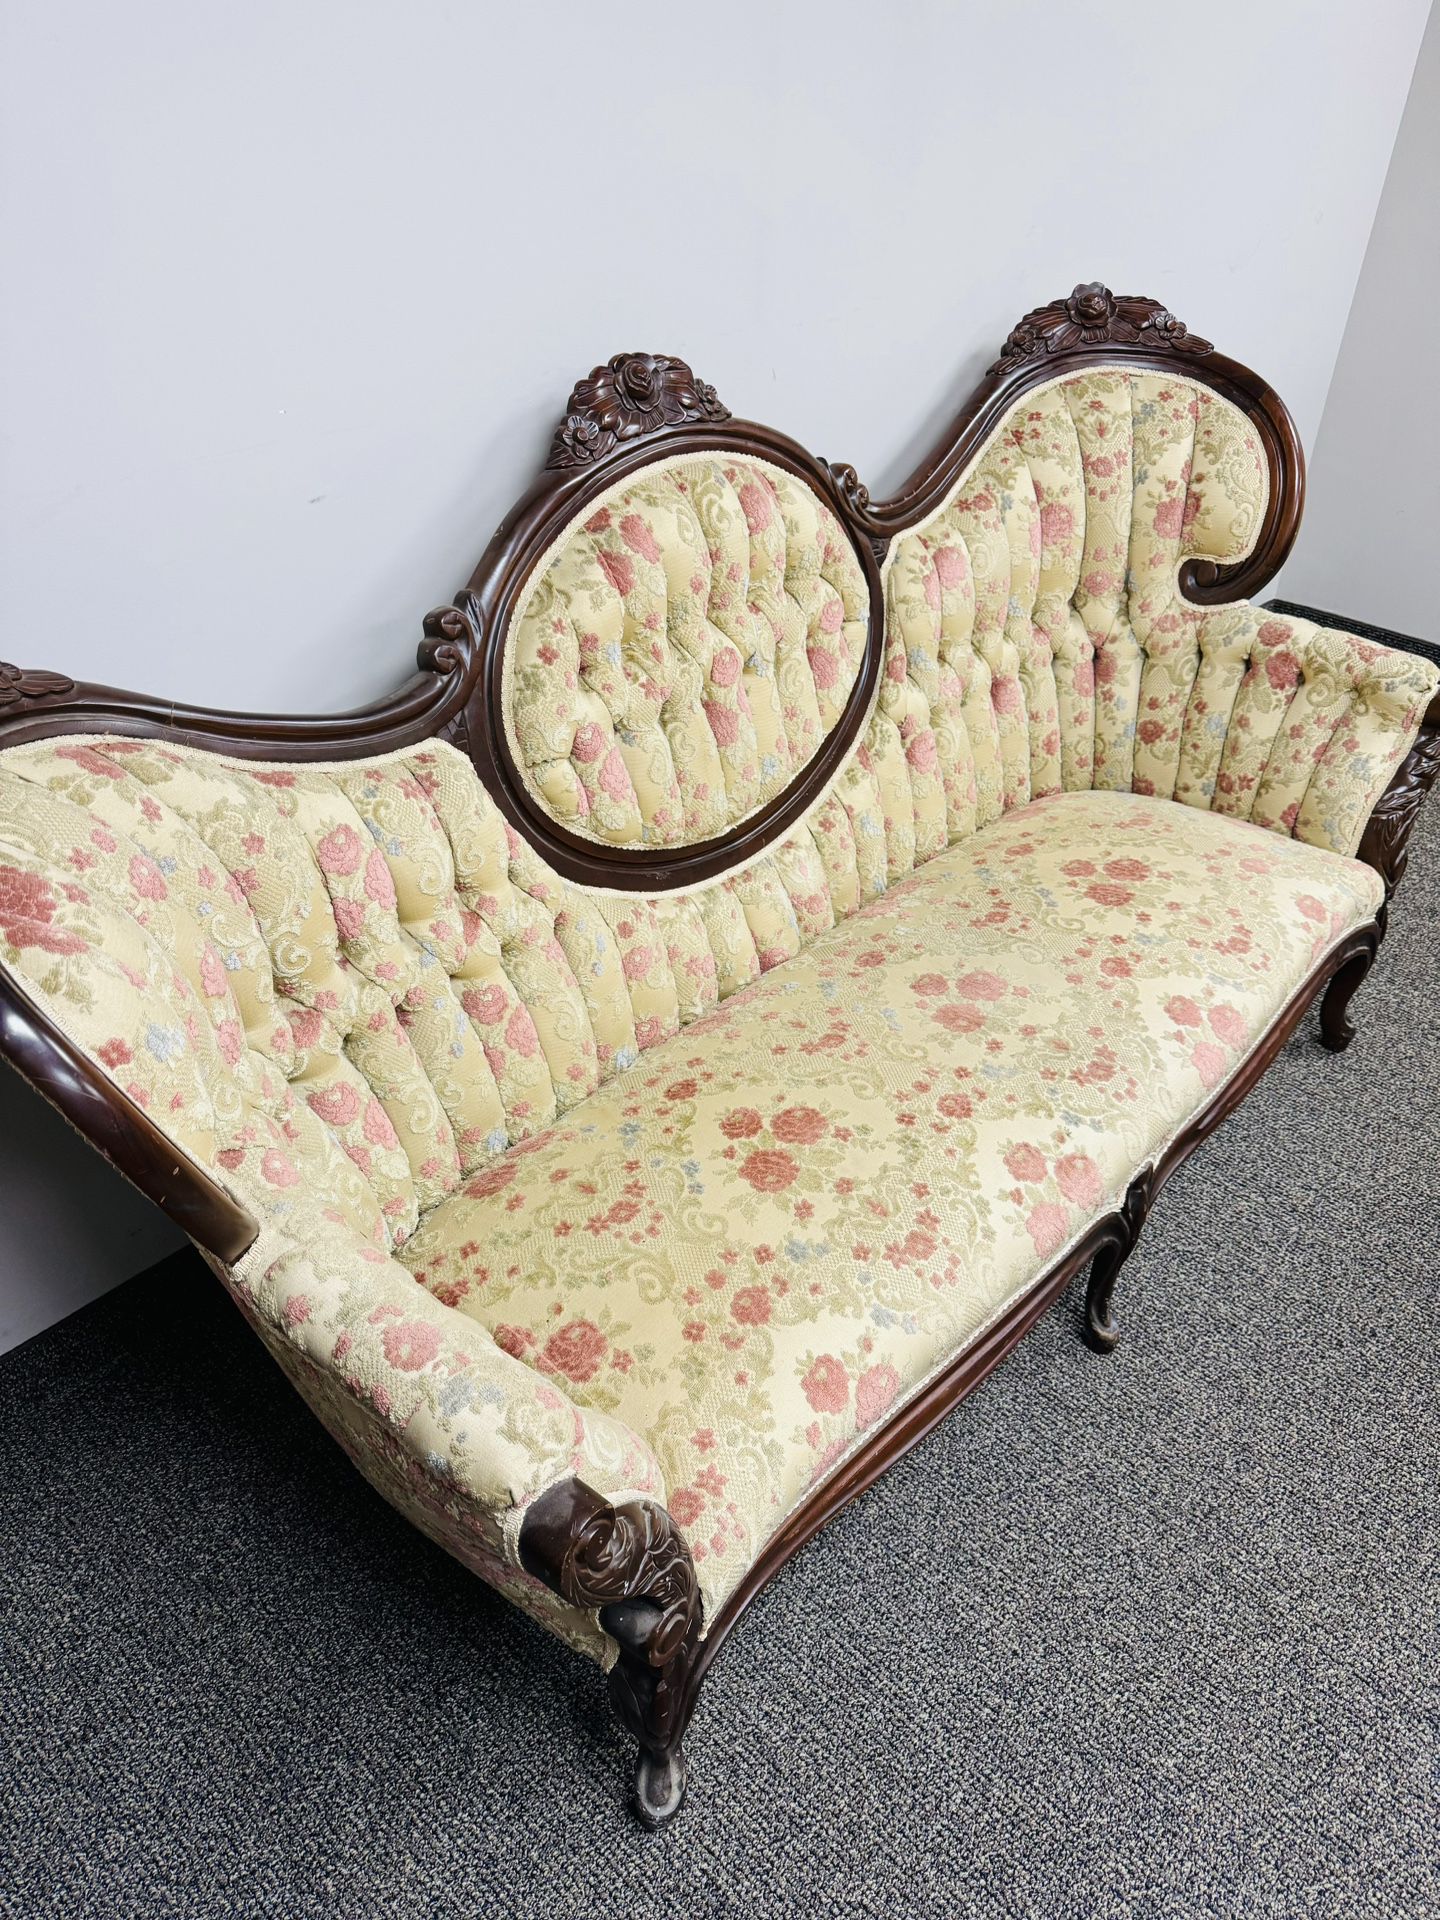 Beautiful Antique Couch Very Good Condition